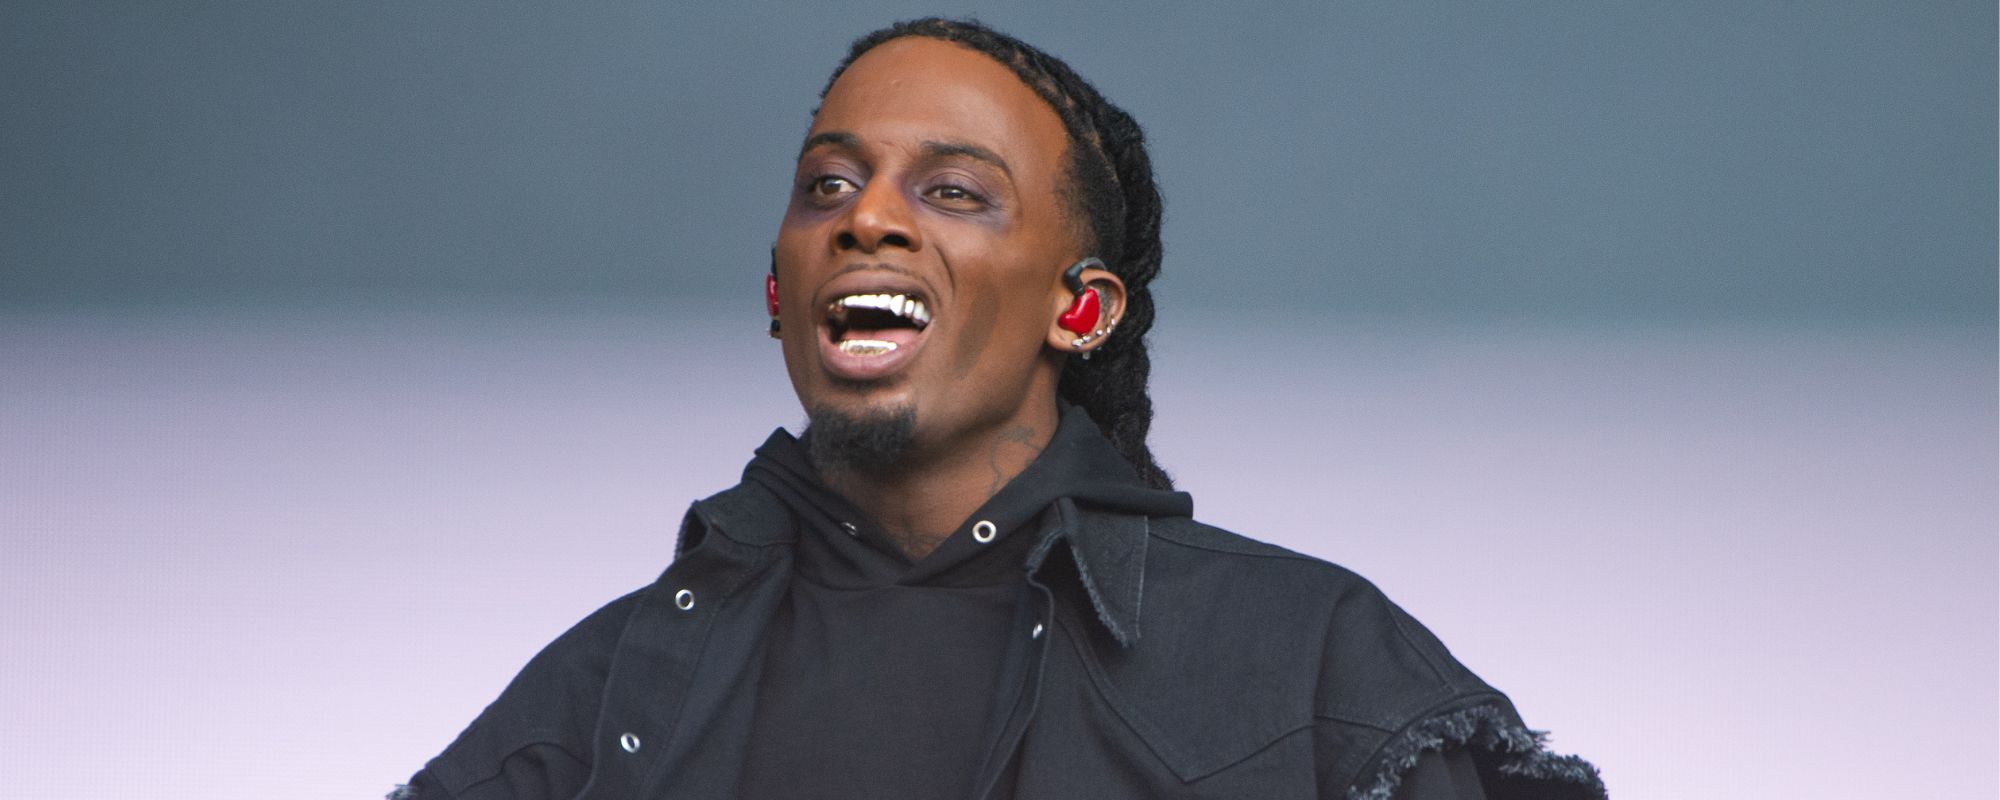 Watch: Playboi Carti Performs Travis Scott Collab “FE!N” for the First Time